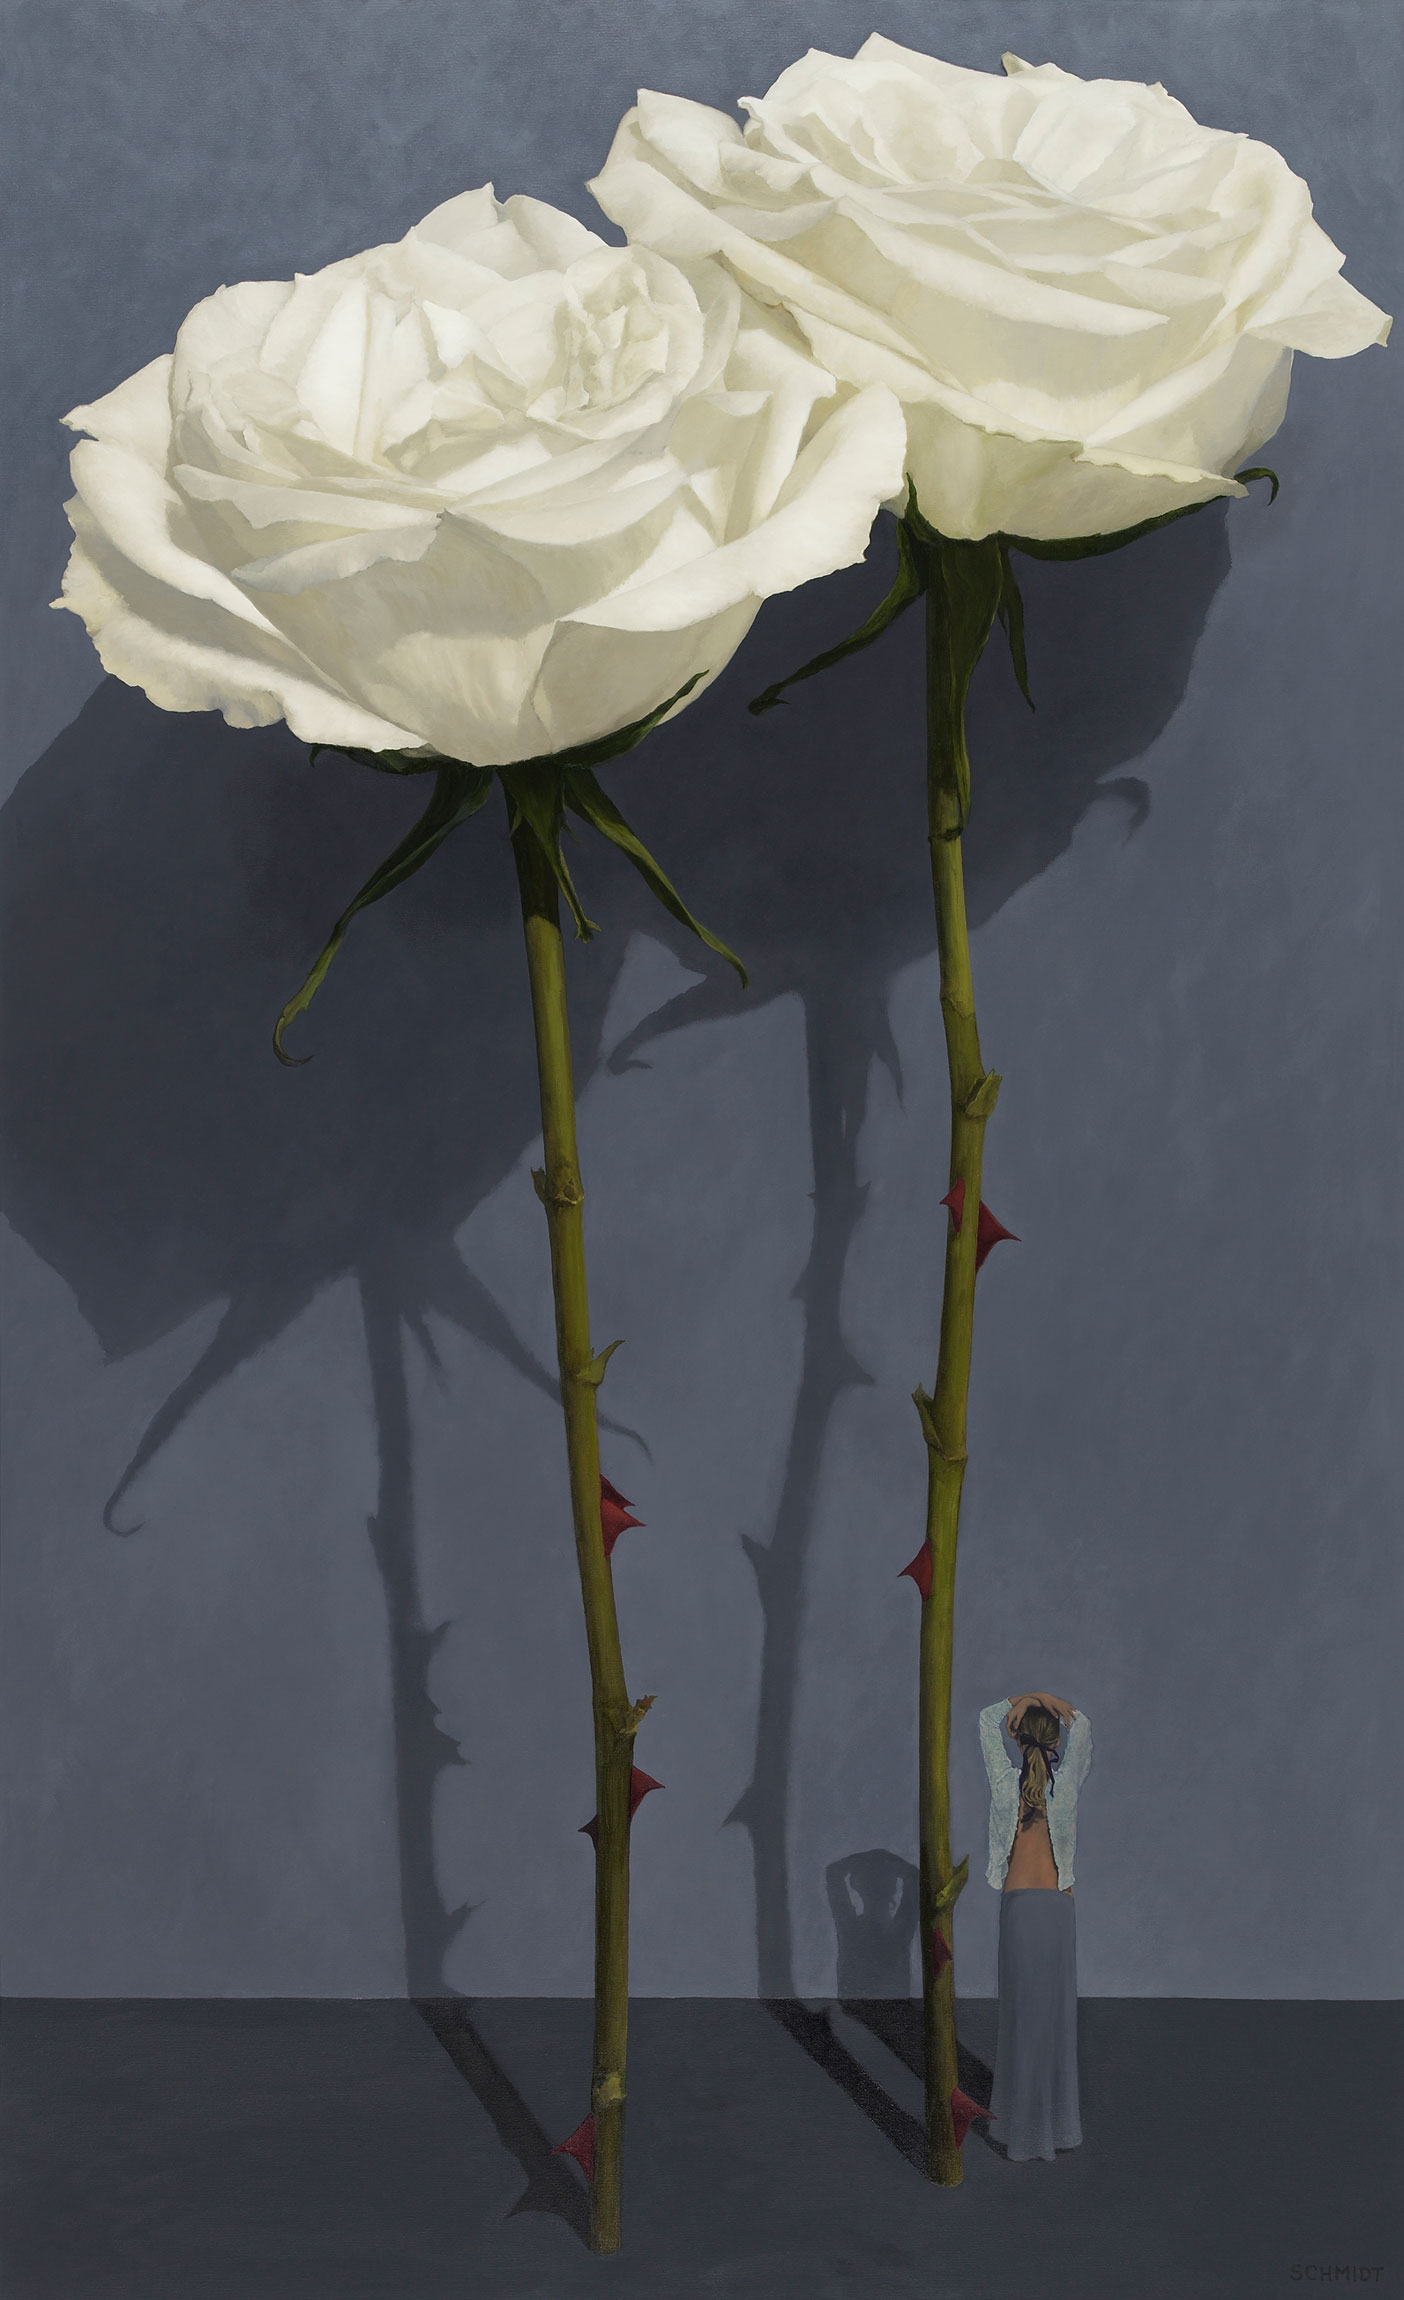 2 white roses with stems and thorns, dark background, shadows on wall, diminutive female figure, arms over head (Sophie)